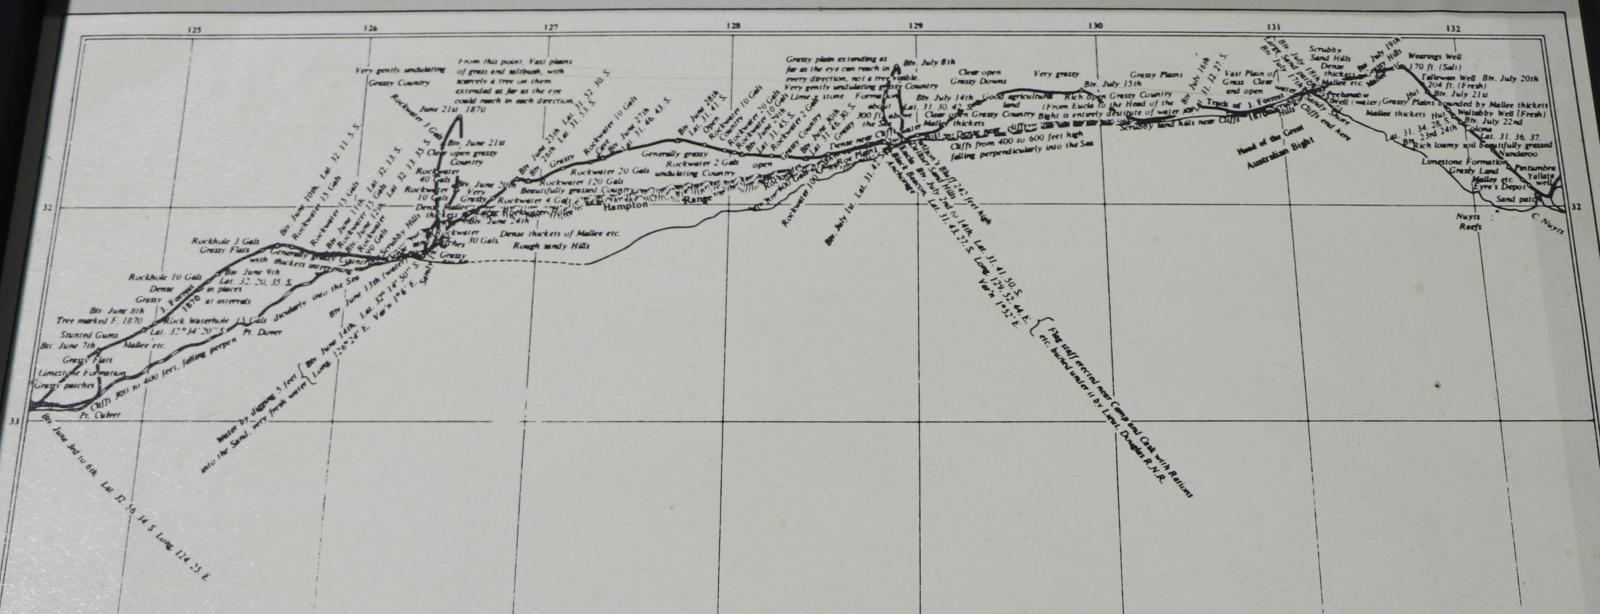 Map of southern coast of Australia, depicting part of John Forrest's journey from Perth to Adelaide. Black ink on white background. Comments and coordinates present along coastline in tiny font, crowding map.